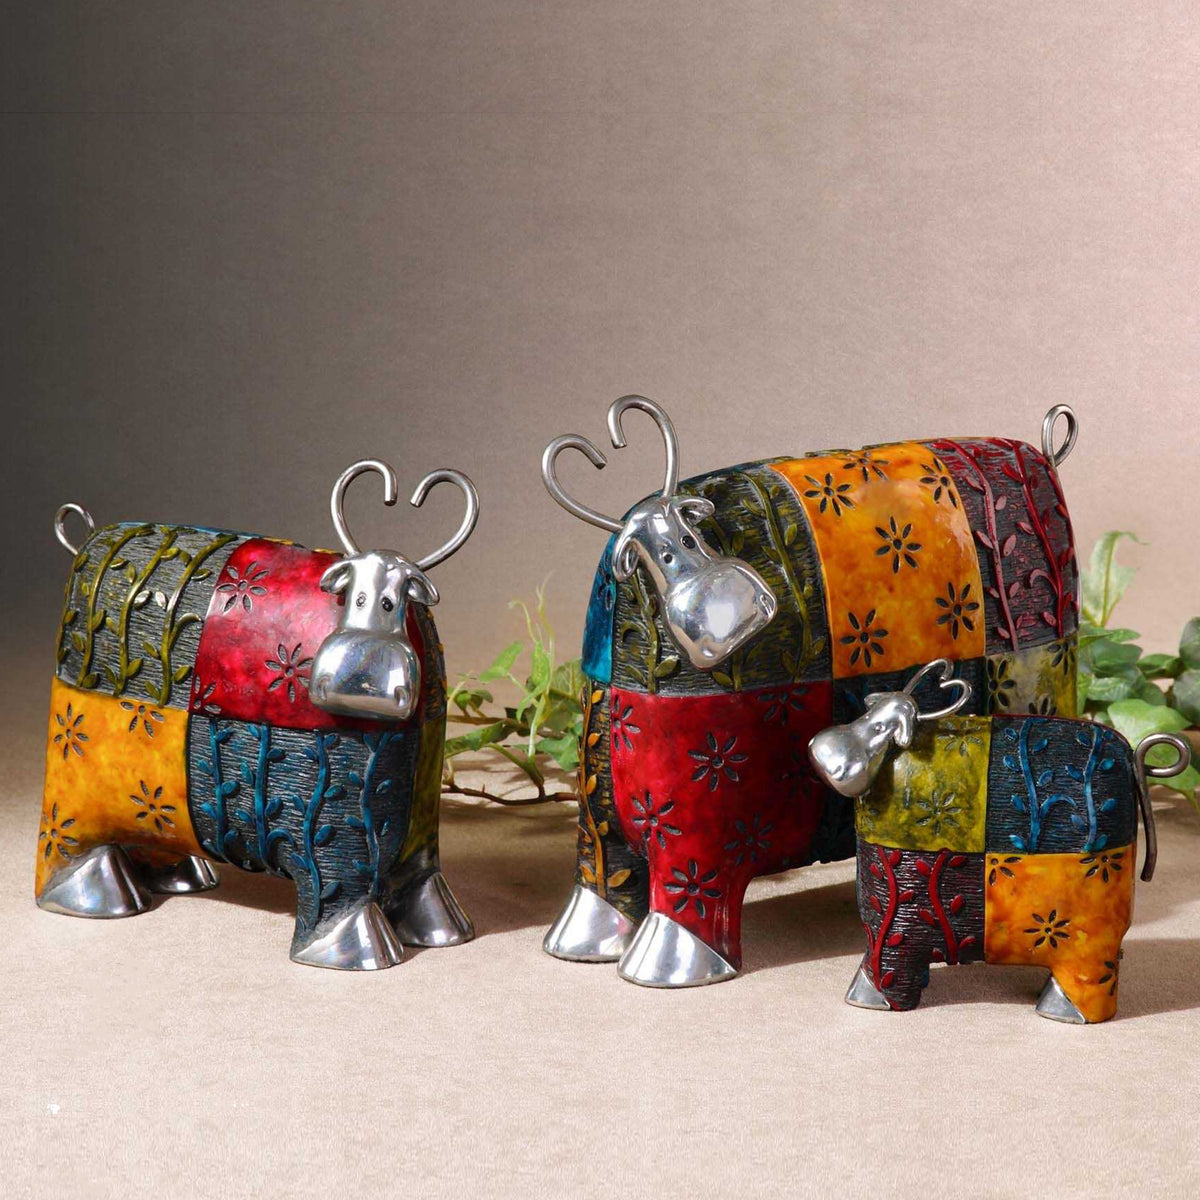 Uttermost Colorful Cows Metal Figurines, Set/3